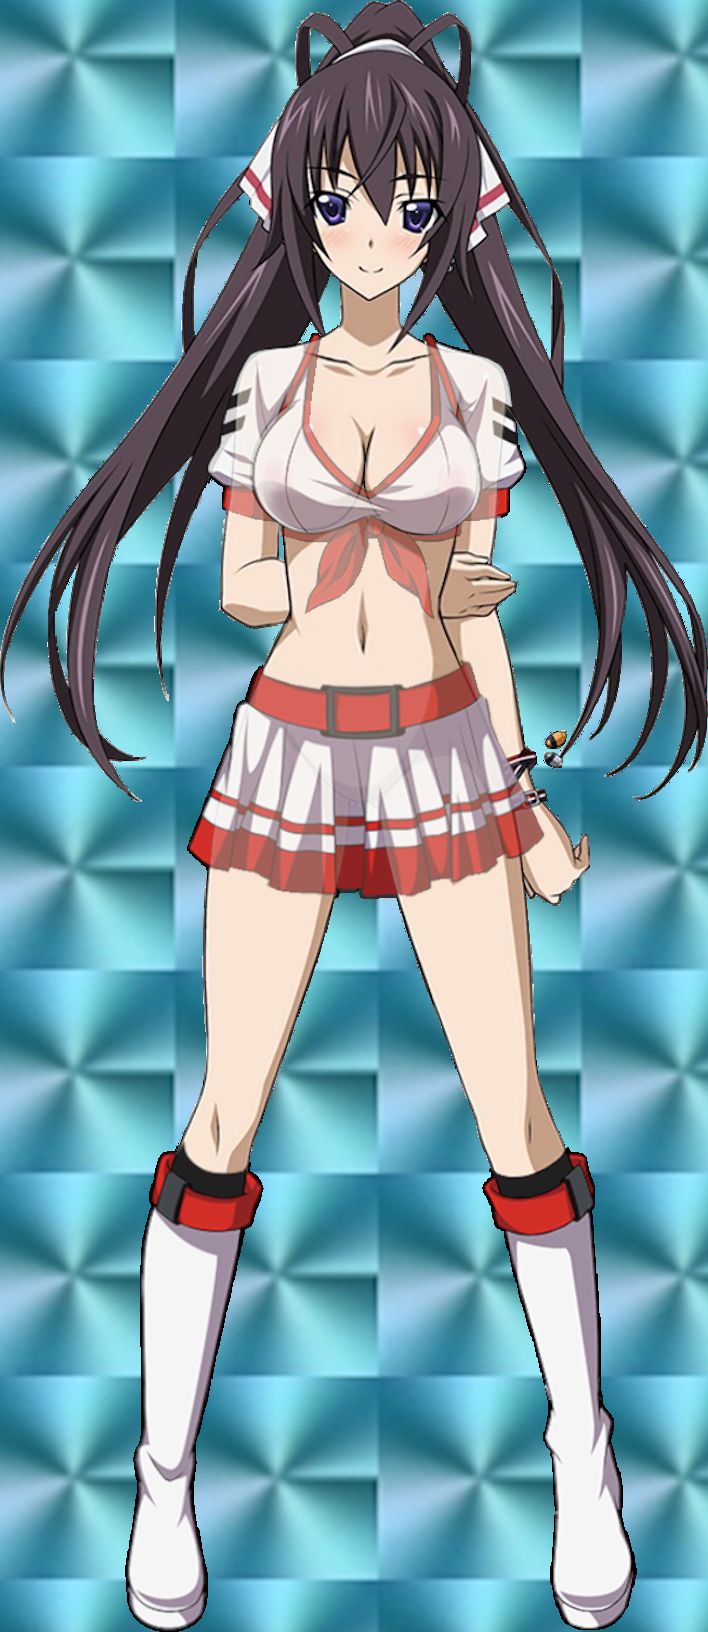 [Erotica character material] PNG background transmission erotic image such as anime character Part 315 20